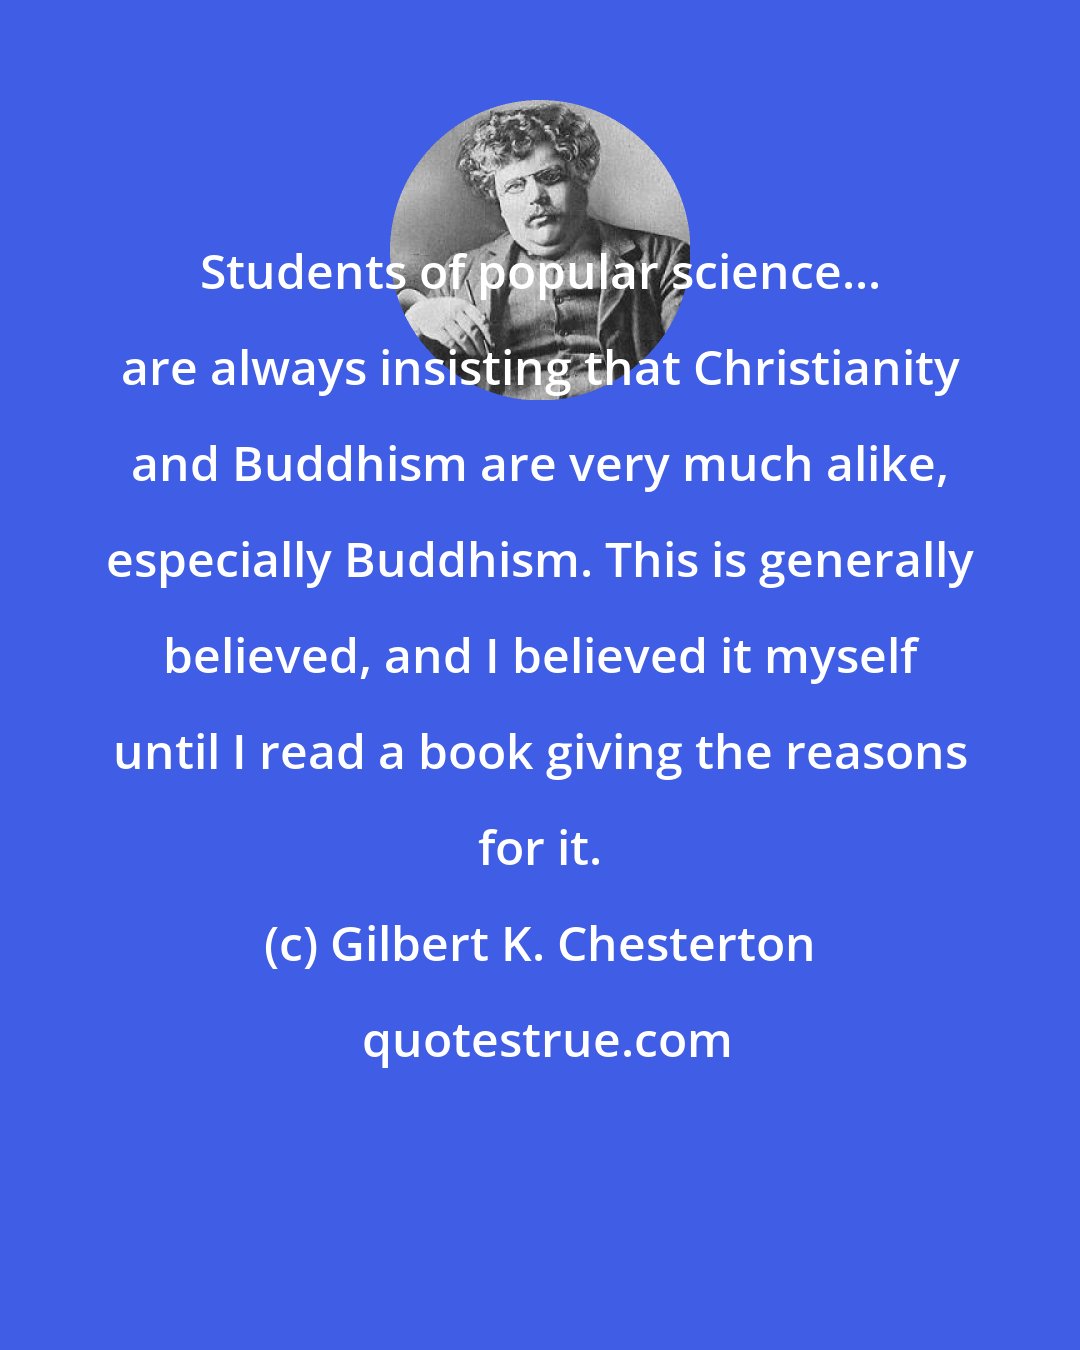 Gilbert K. Chesterton: Students of popular science... are always insisting that Christianity and Buddhism are very much alike, especially Buddhism. This is generally believed, and I believed it myself until I read a book giving the reasons for it.